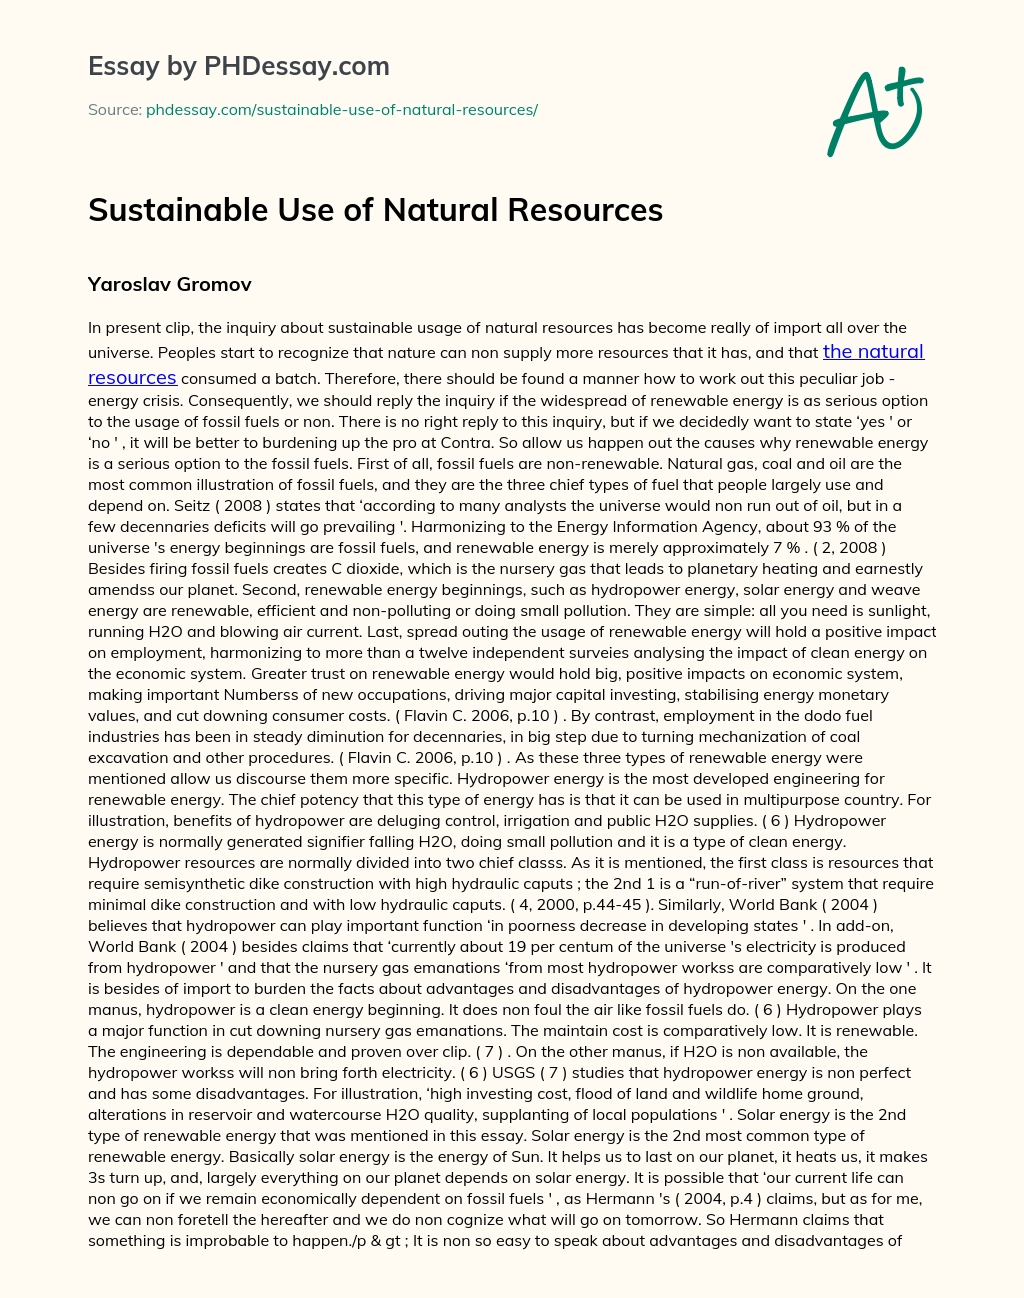 Sustainable Use of Natural Resources essay